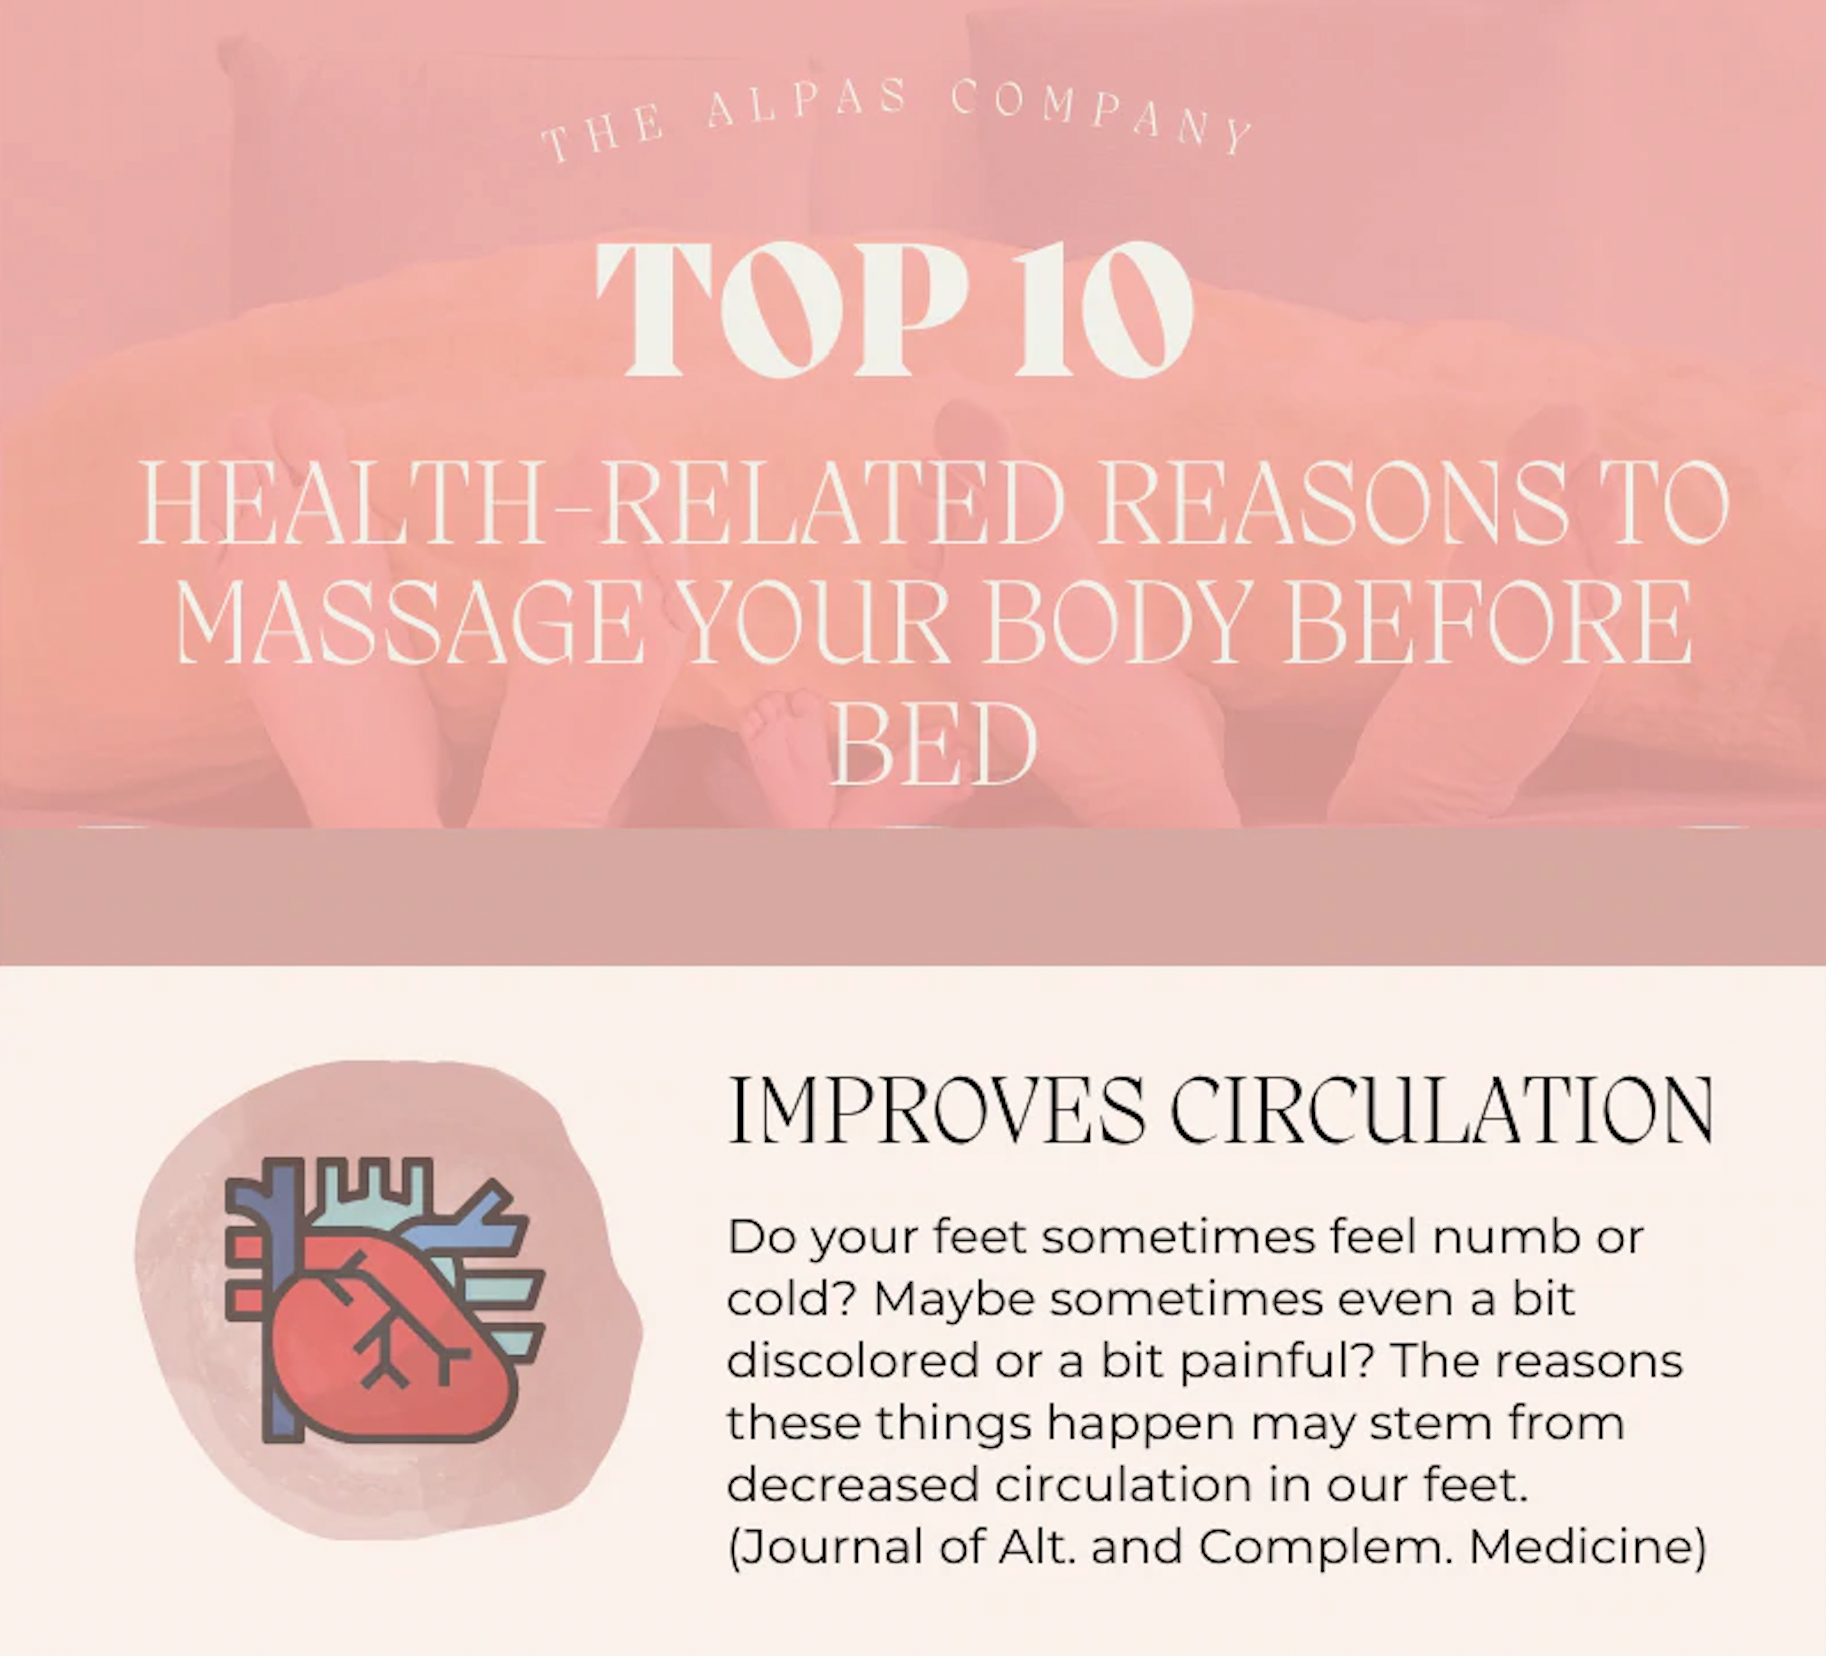 Top 10 Health-Related Reasons to Massage Your Body